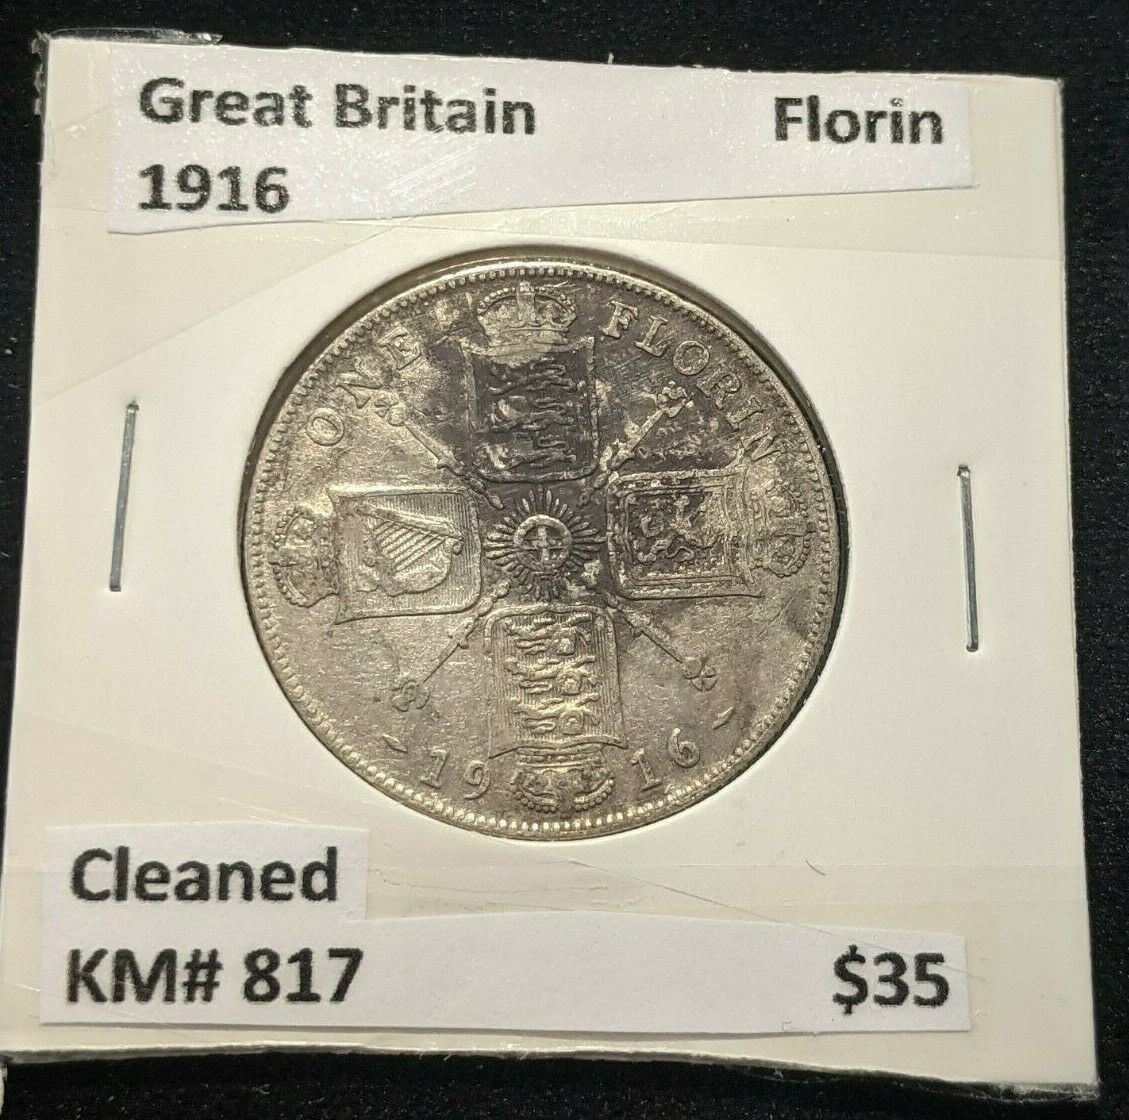 Great Britain 1916 Florin KM# 817 Cleaned #152